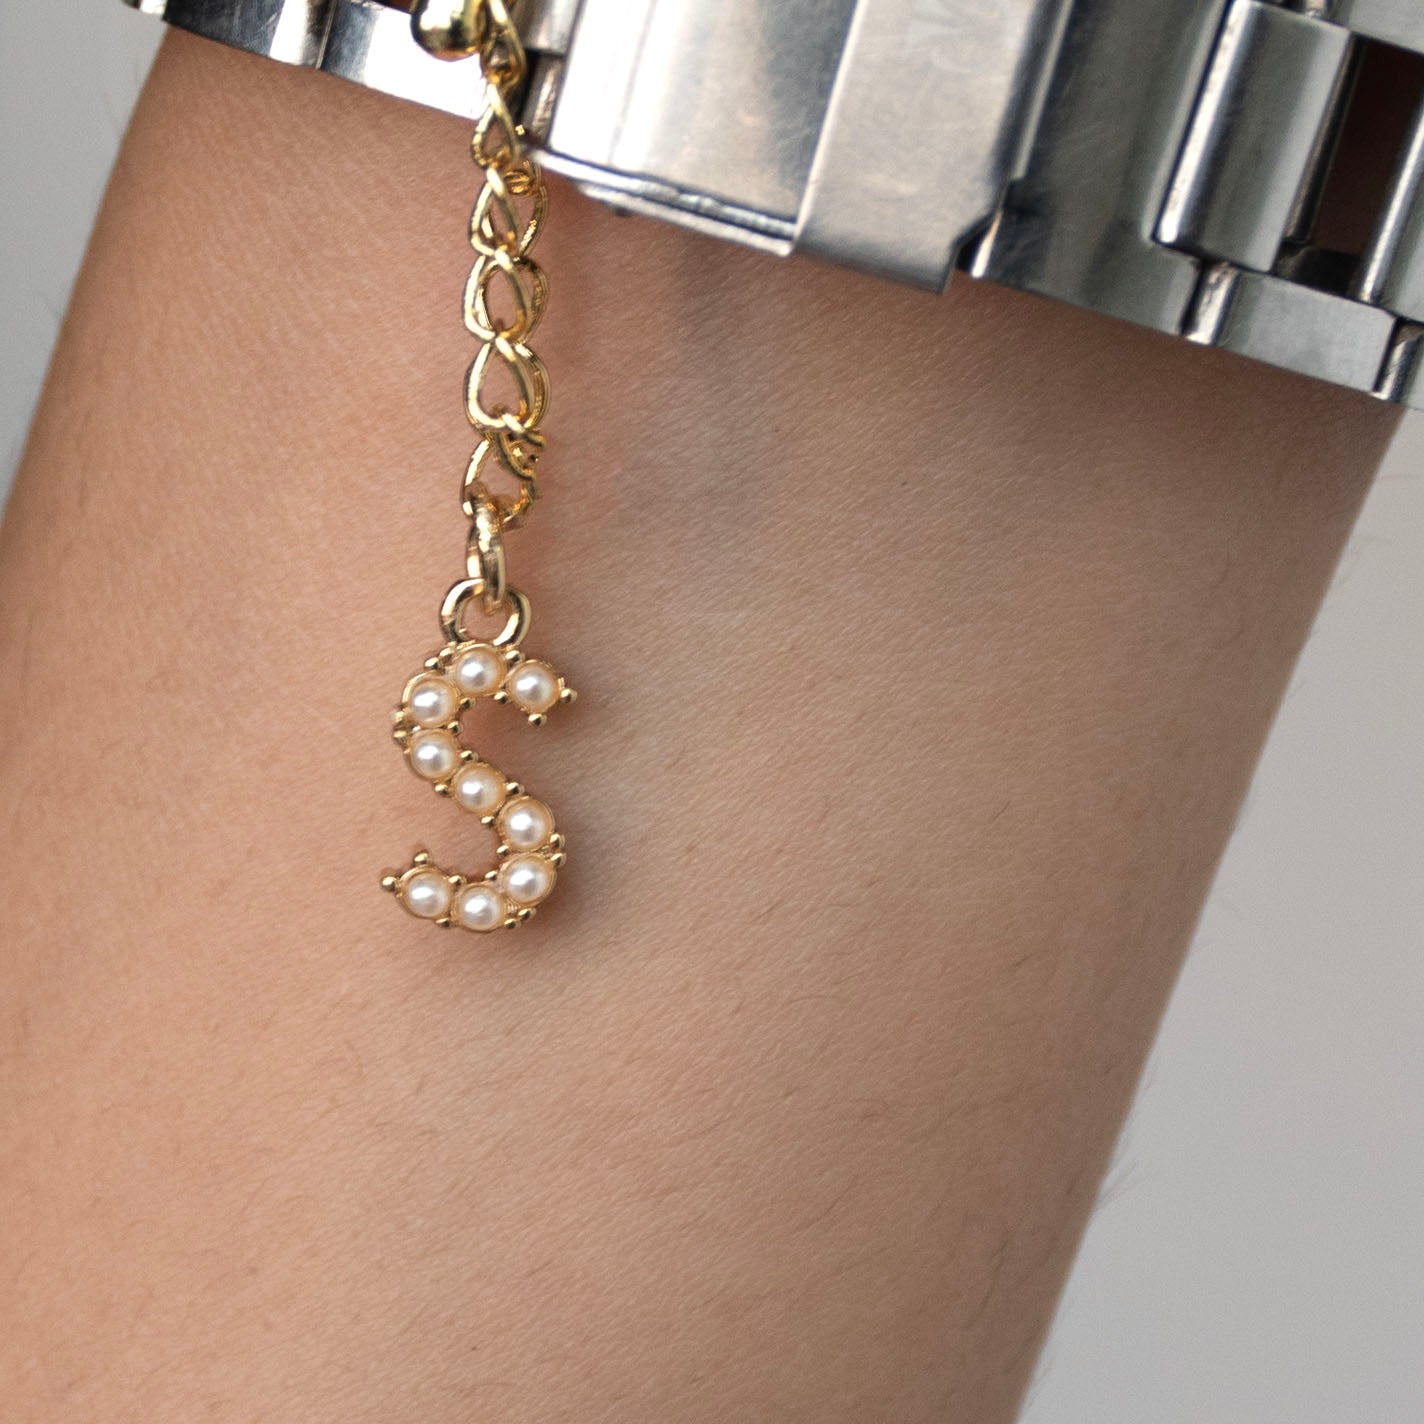 Initial Pearl Watch Charm